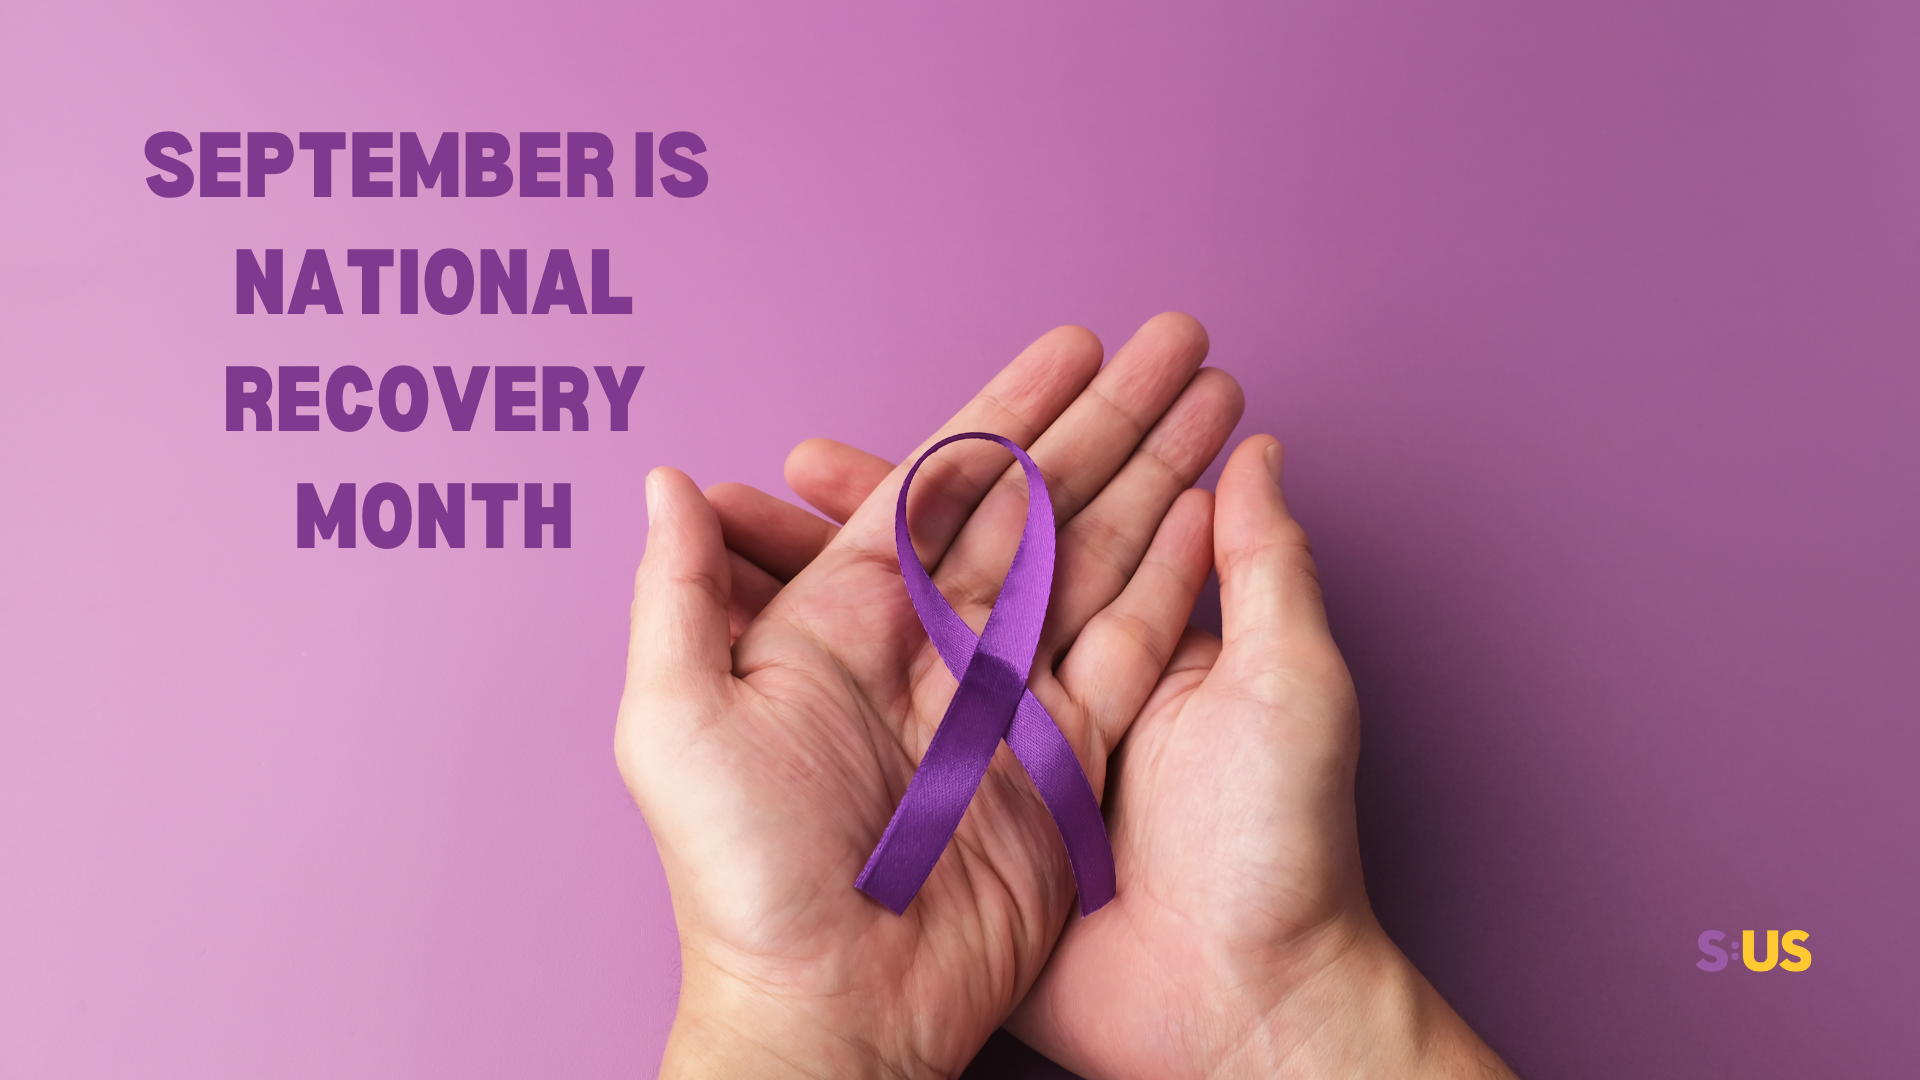 Commemorating National Recovery Month